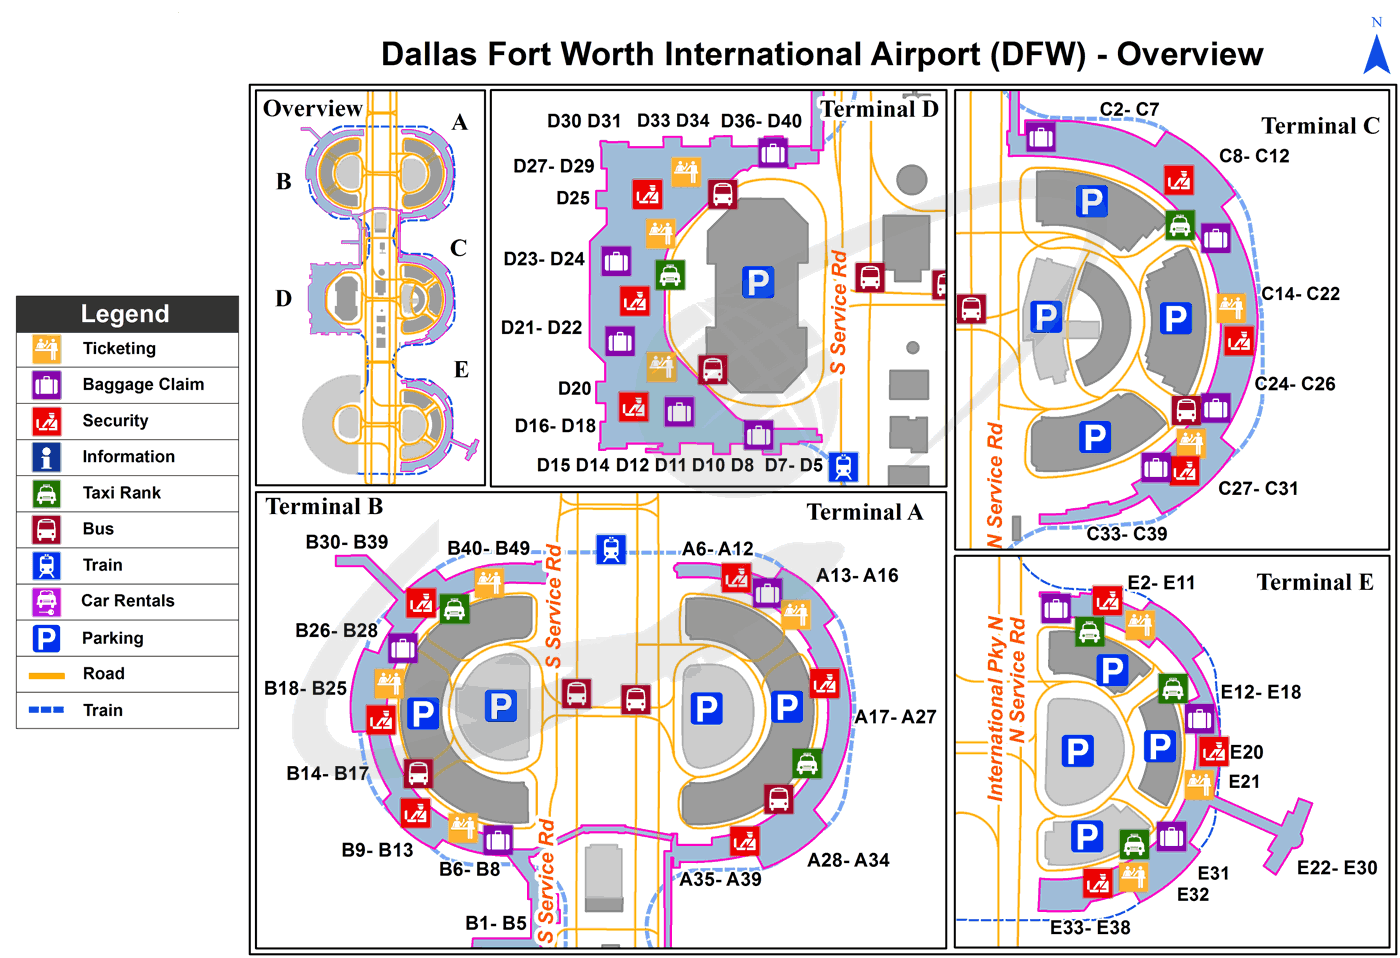 DFW_overview_map